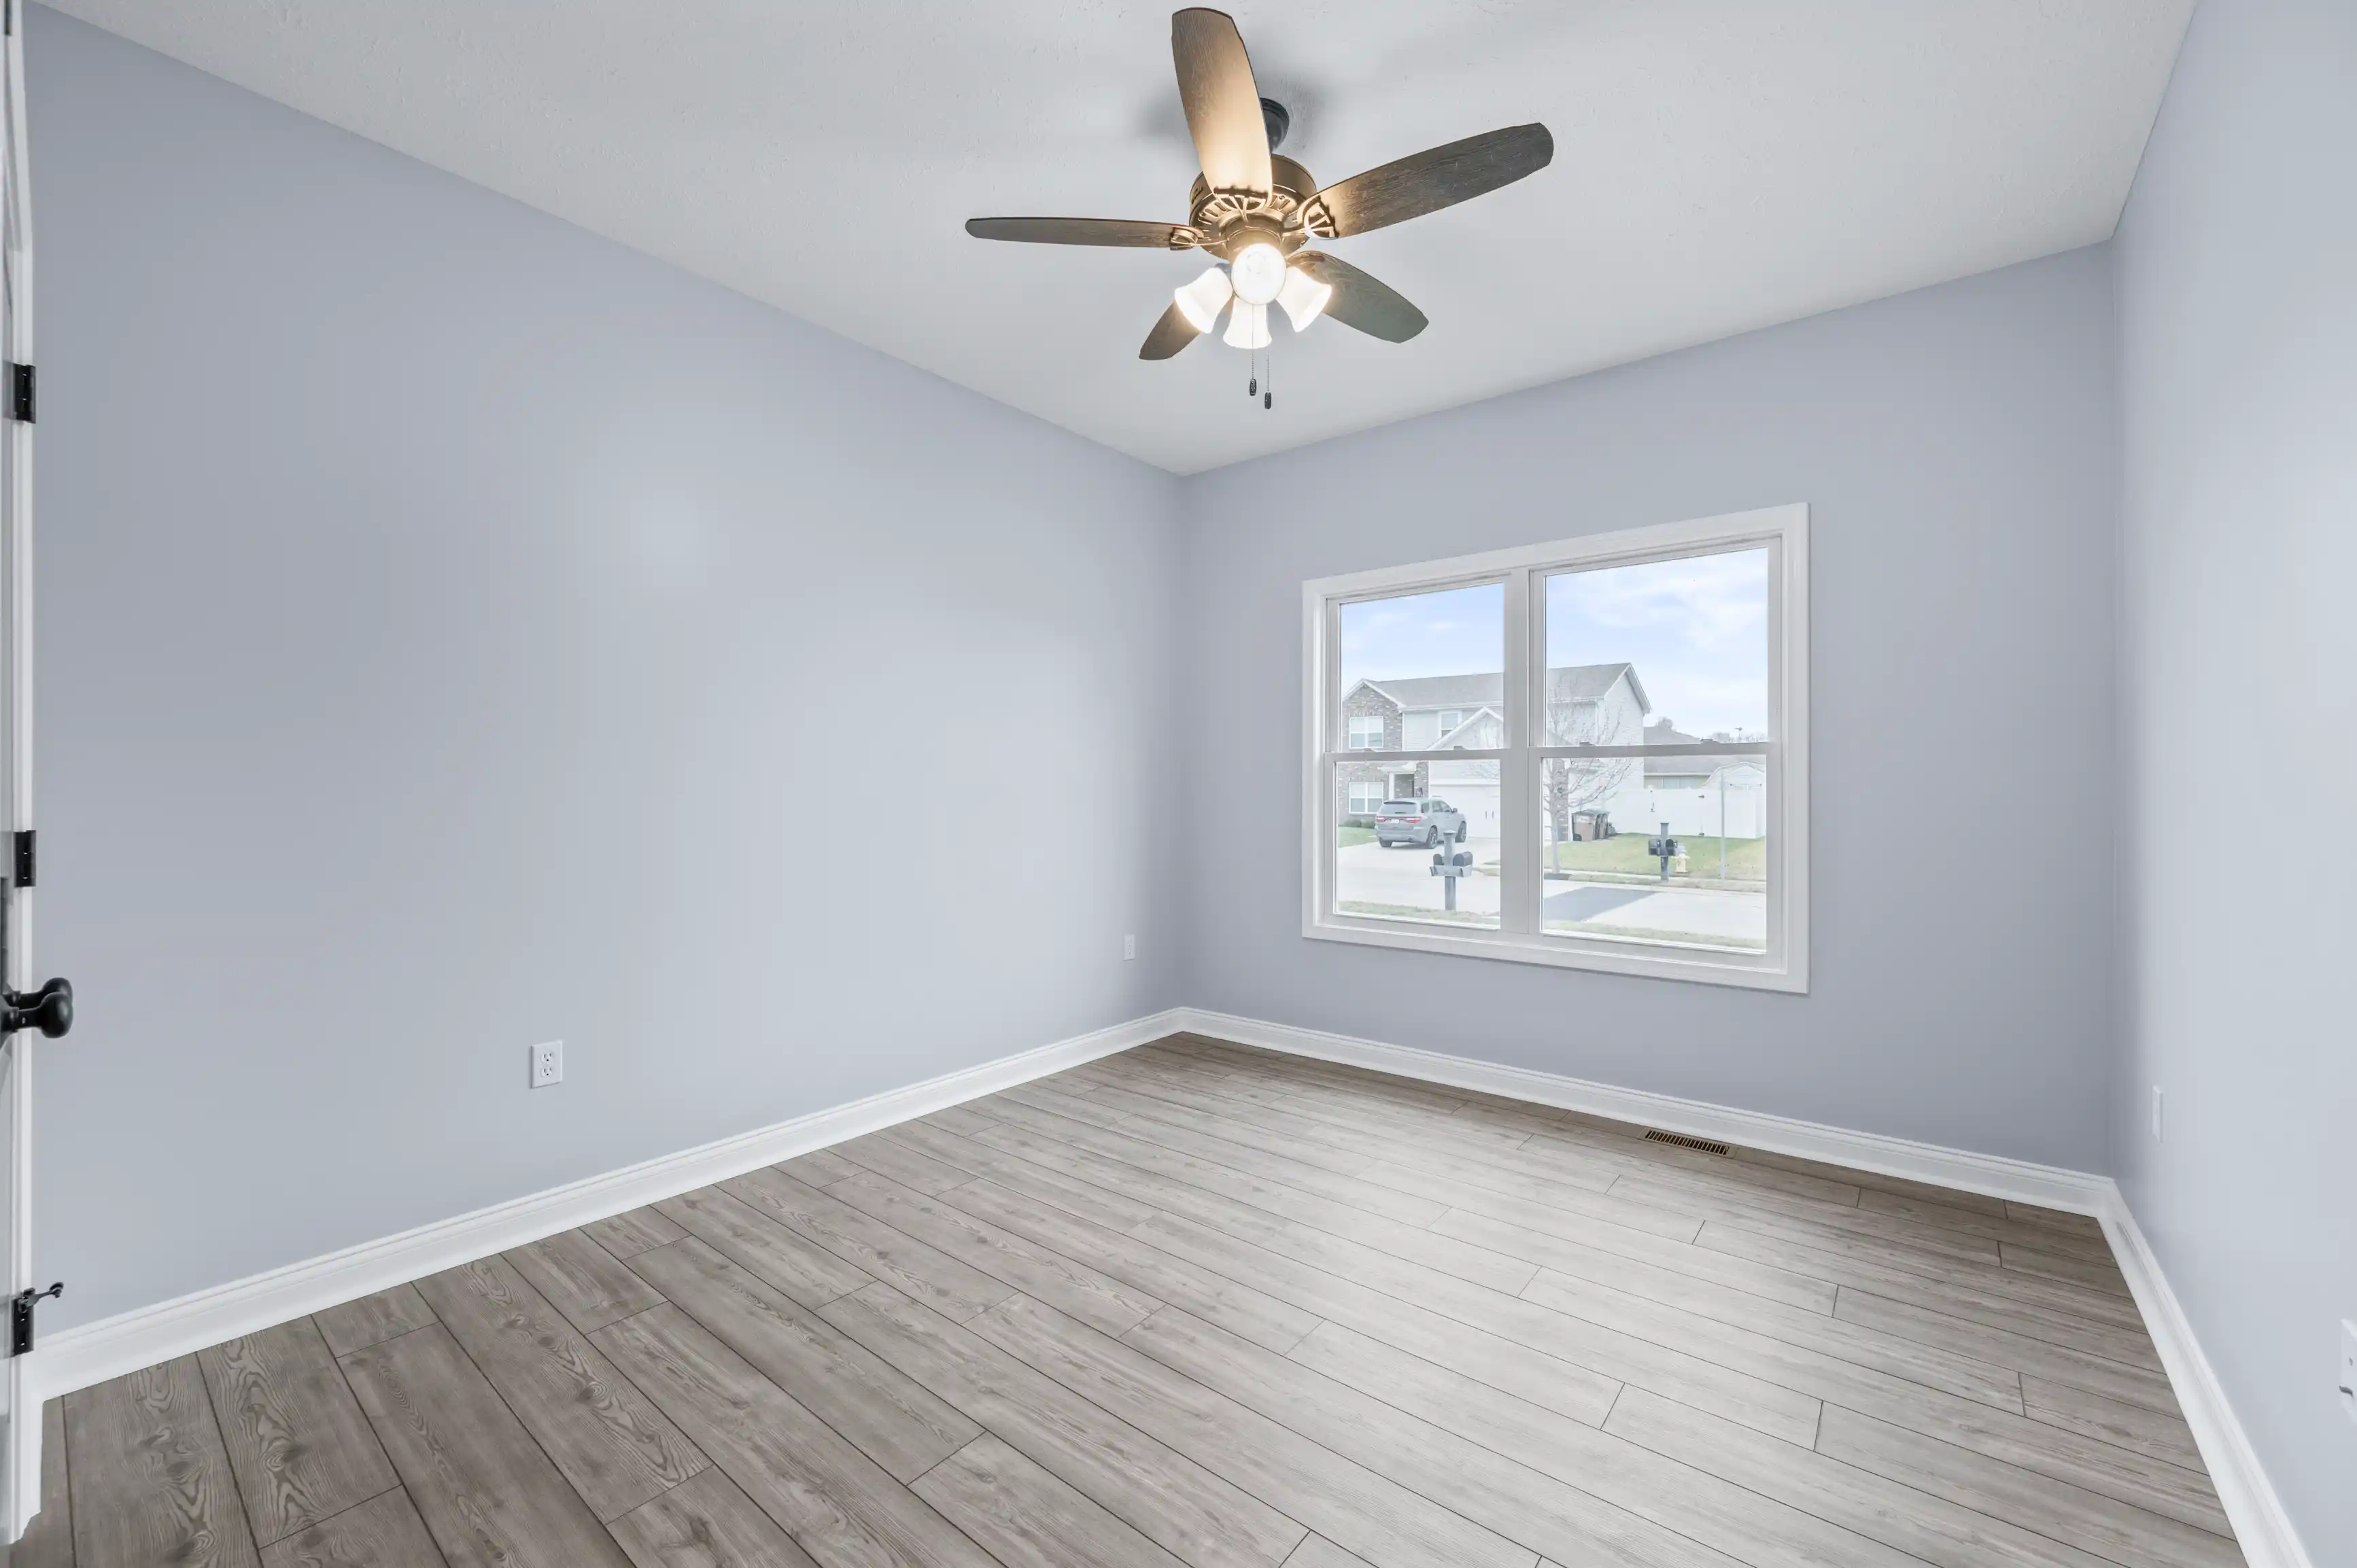 Empty room with light gray walls, wood flooring, and a ceiling fan, featuring a large window with a view of the neighborhood.